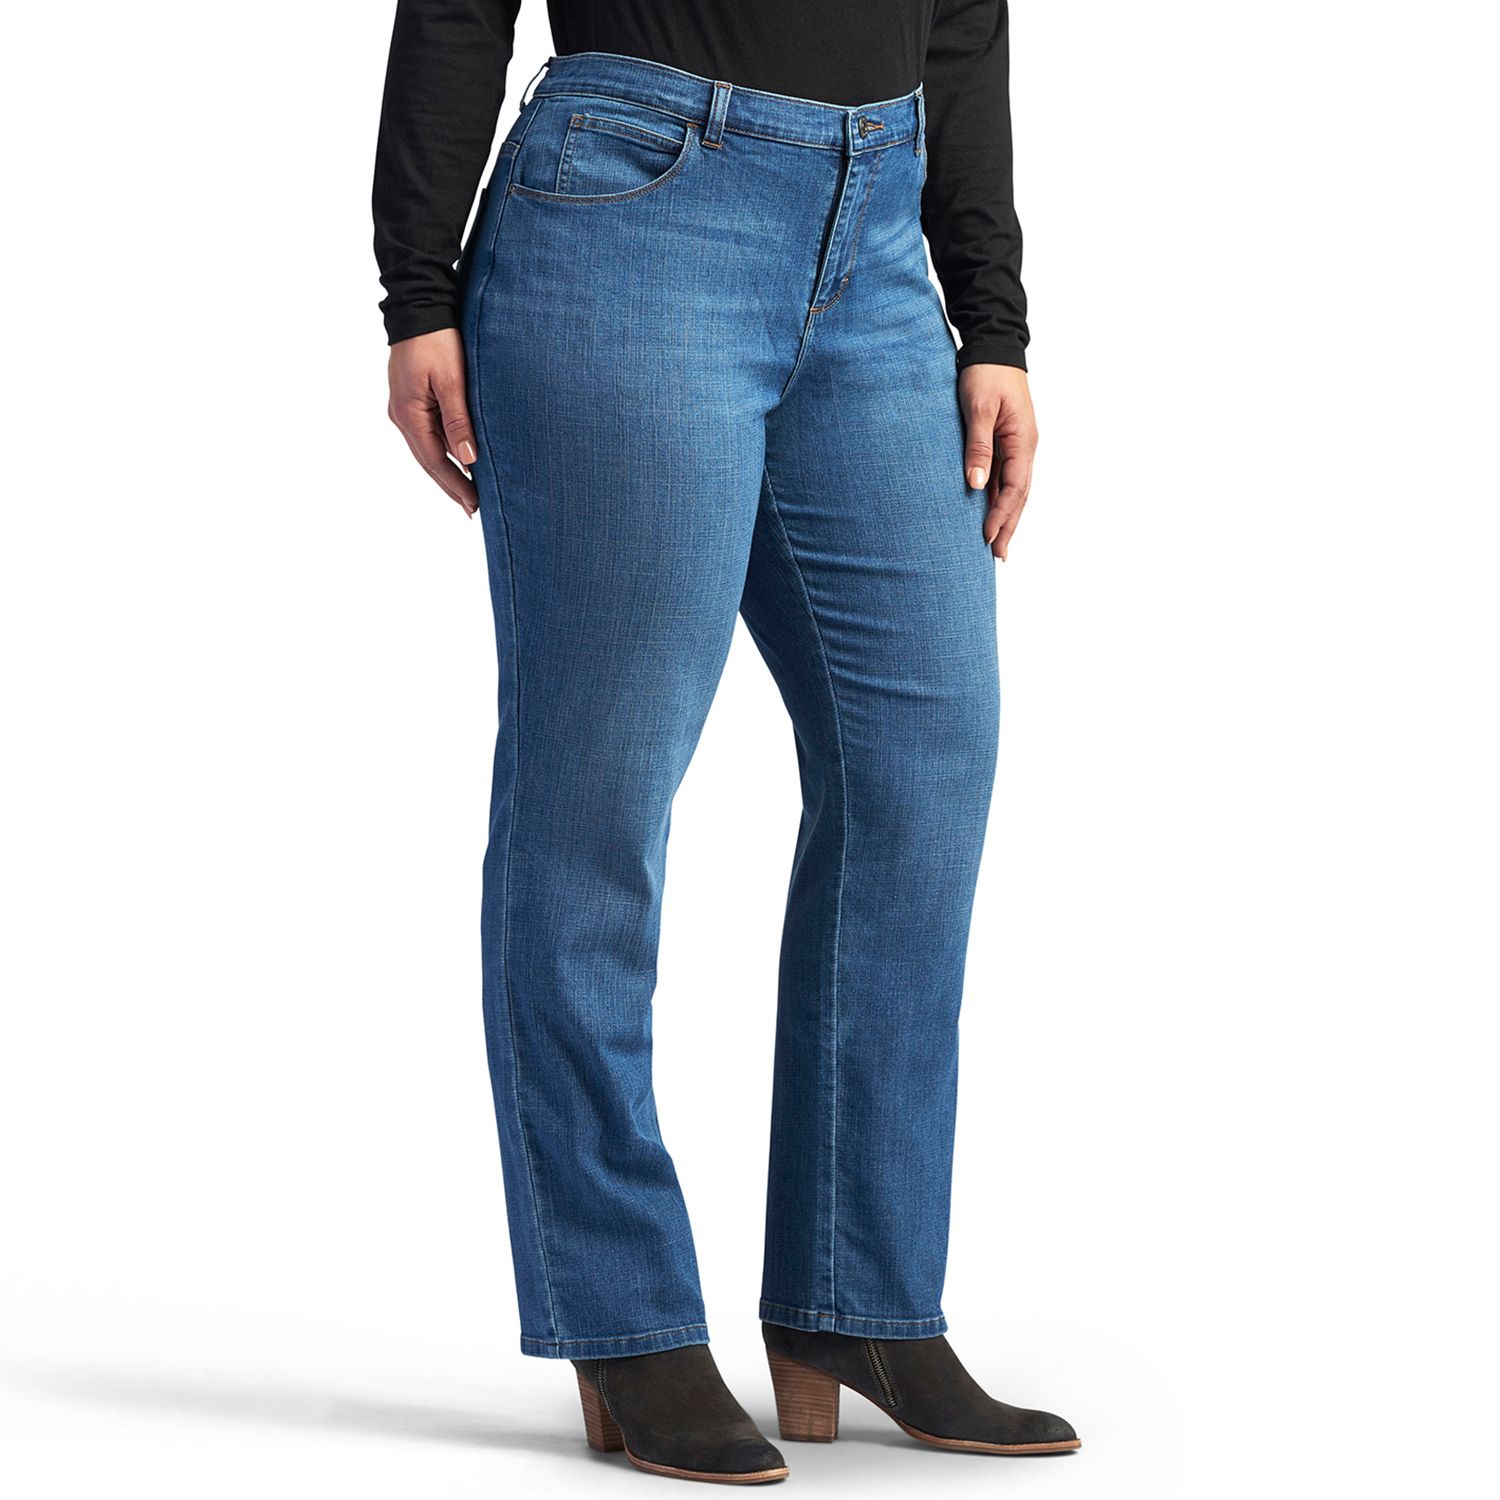 Womens Plus Jeans - Bottoms, Clothing 